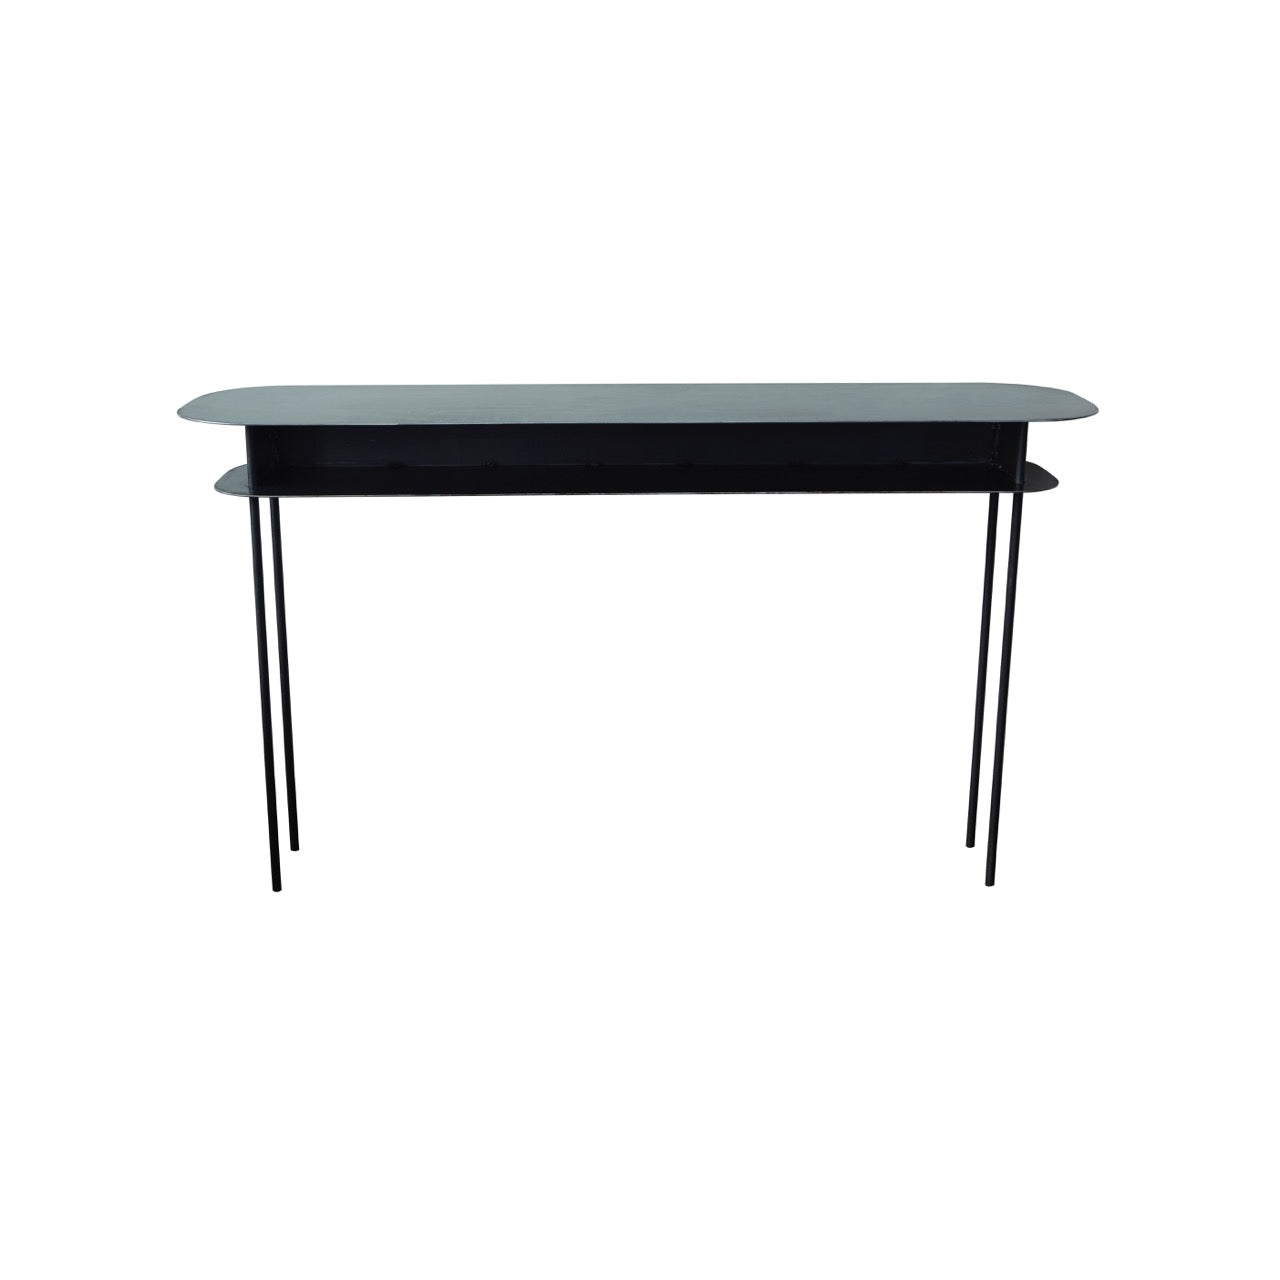 Maison Sarah Lavoine elegant slim Tokyo console table is ideal for entrance, lounge or dining room. Made in waxed steel and handcrafted by French artisan. | 